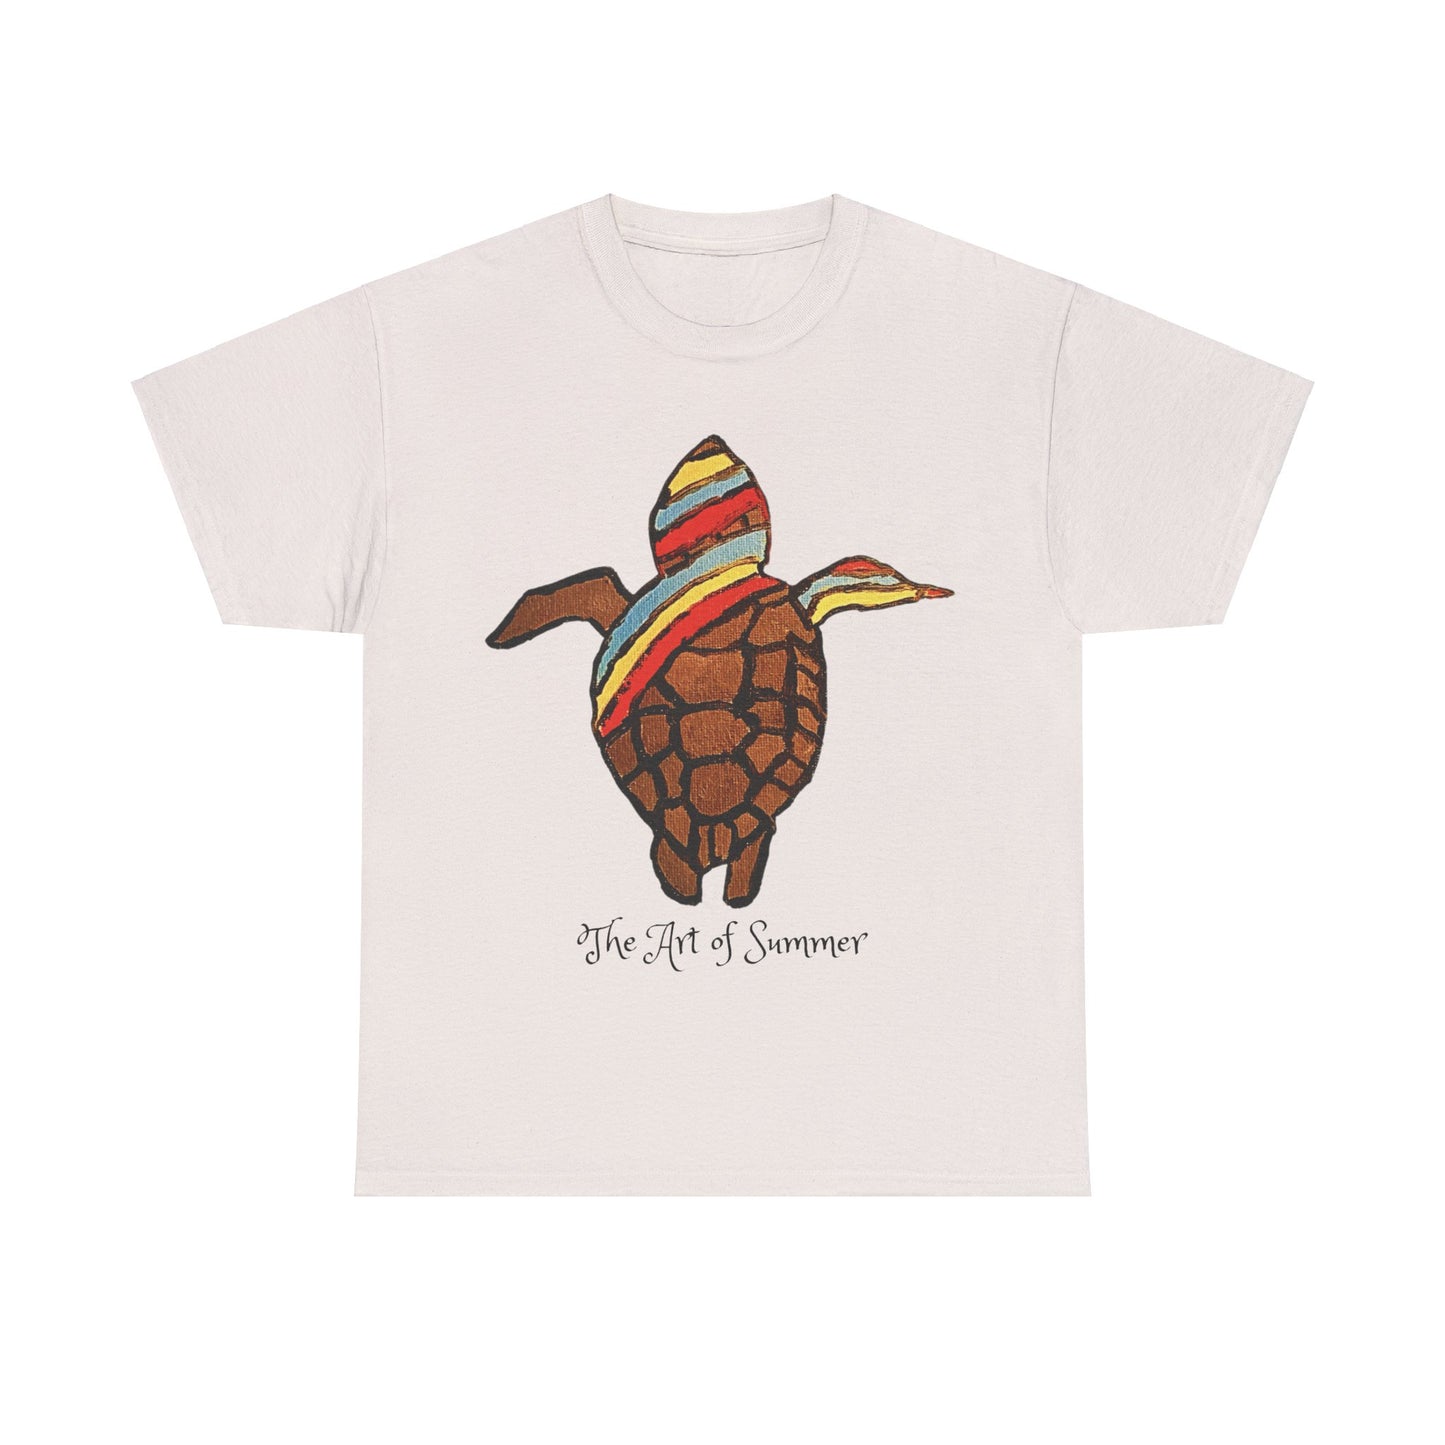 Summer Sea Turtle - ART OF SUMMER - Tee Shirt - Save the Sea Turtle - Protect the Oceans Whimsical Colored Sea Turtle Unique Collection Express Delivery available